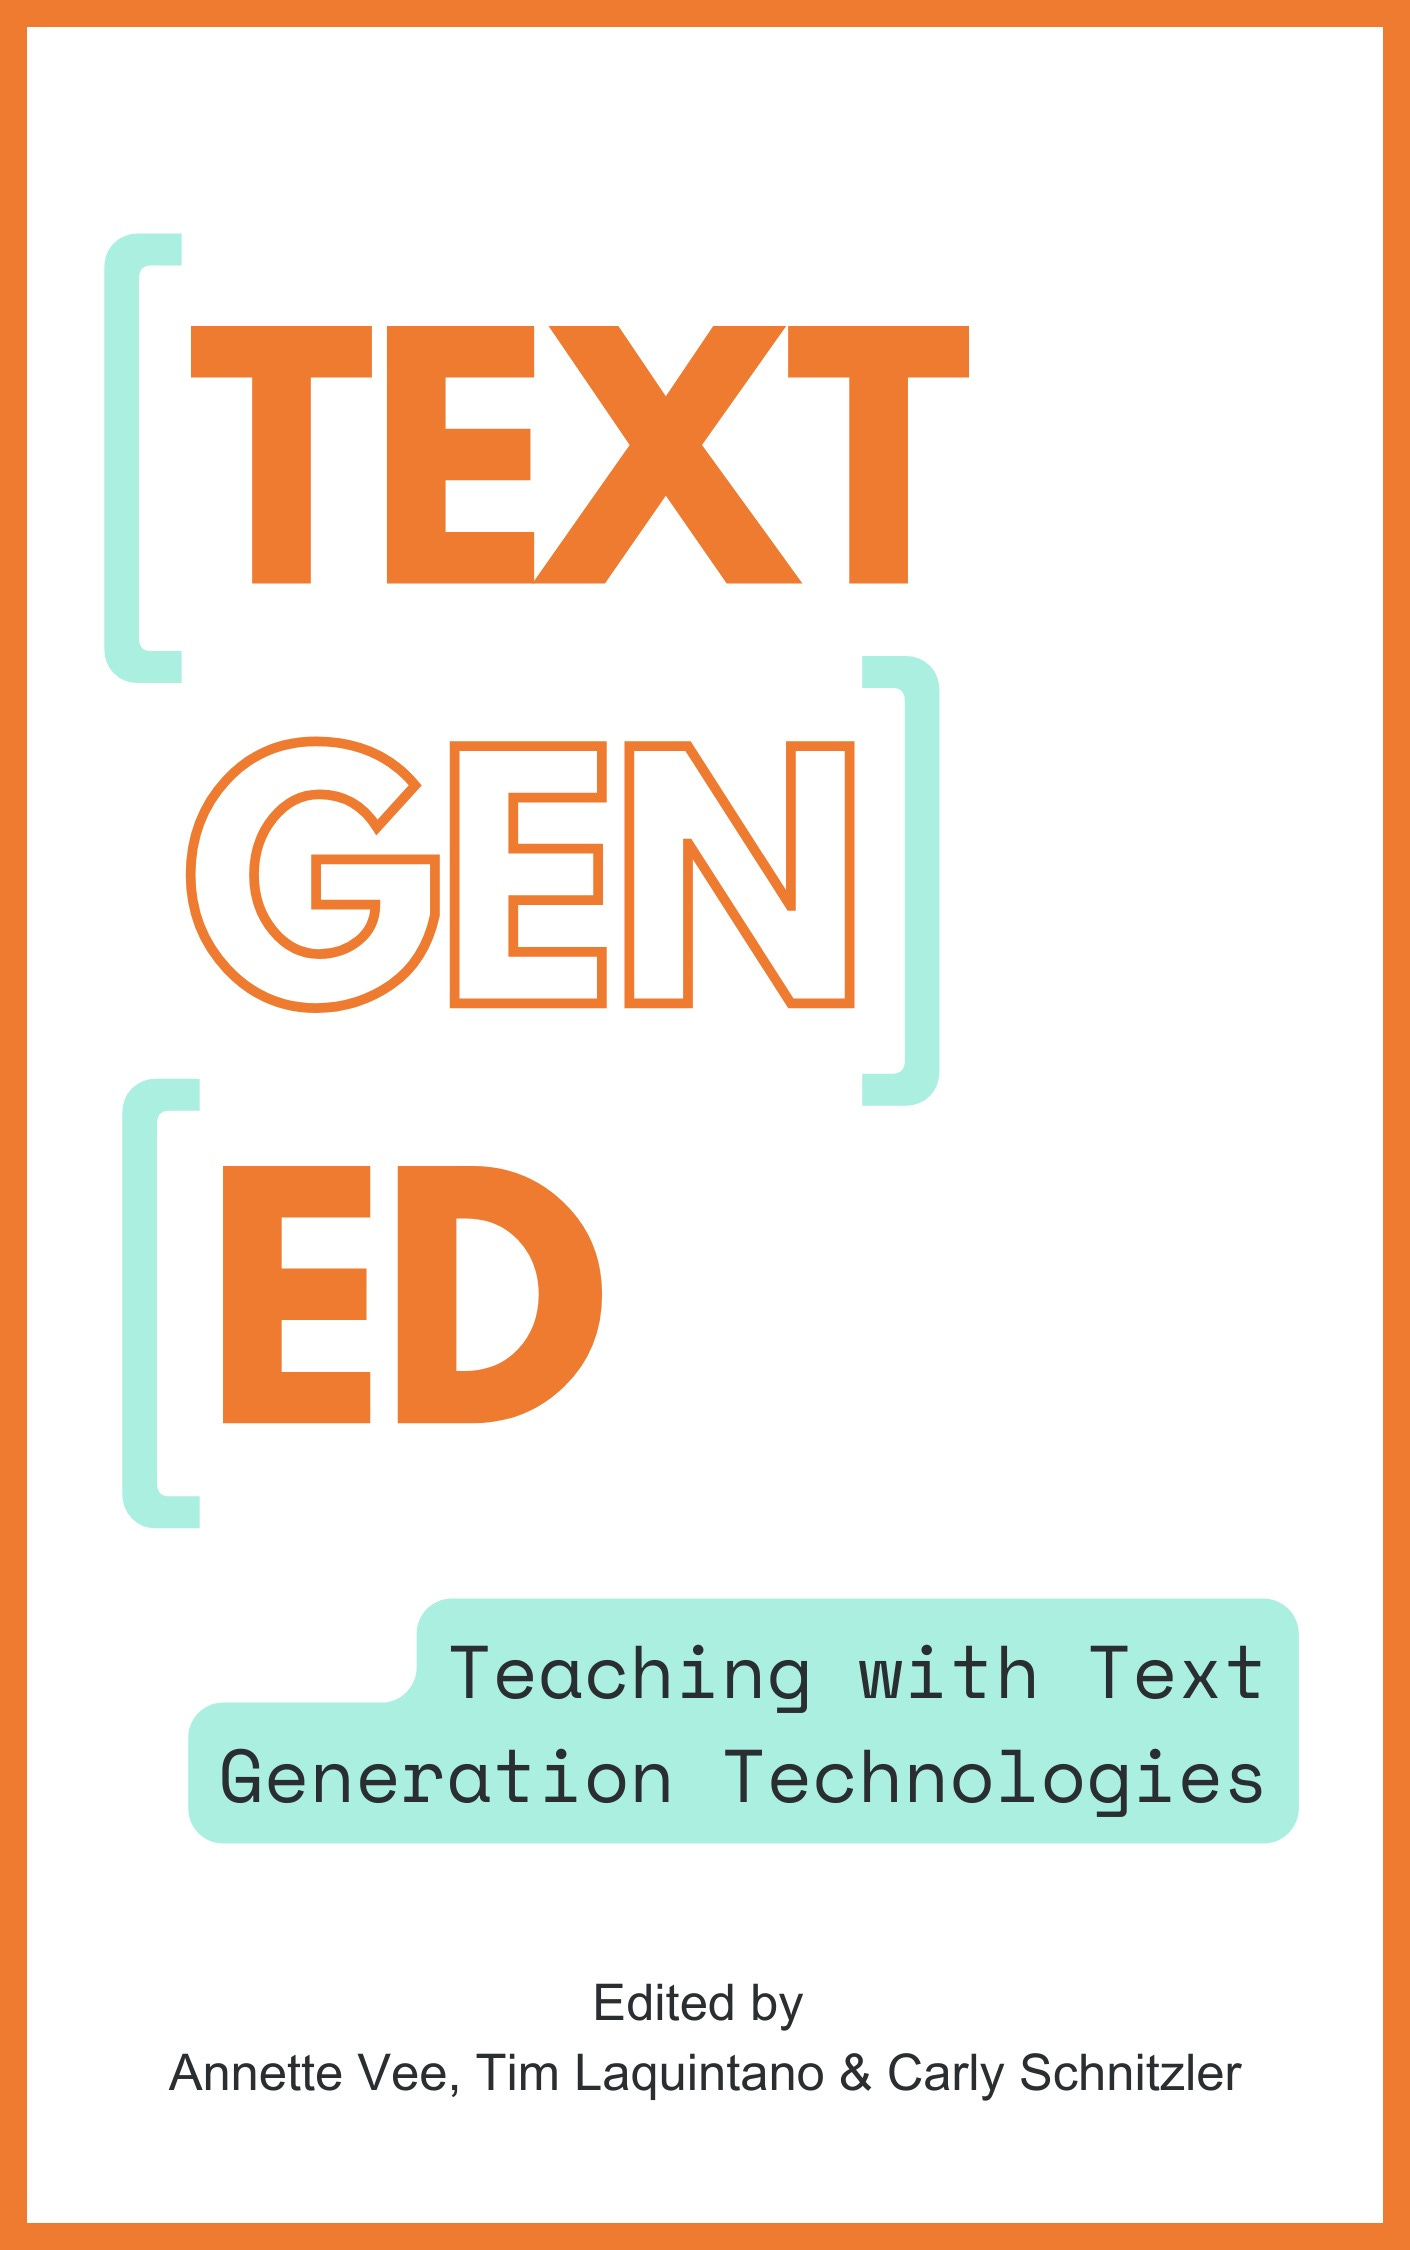 TextGenEd: Teaching with Text Generation Technologies edited by Annette Vee, Tim Laquintano, and Carly Schnitzler